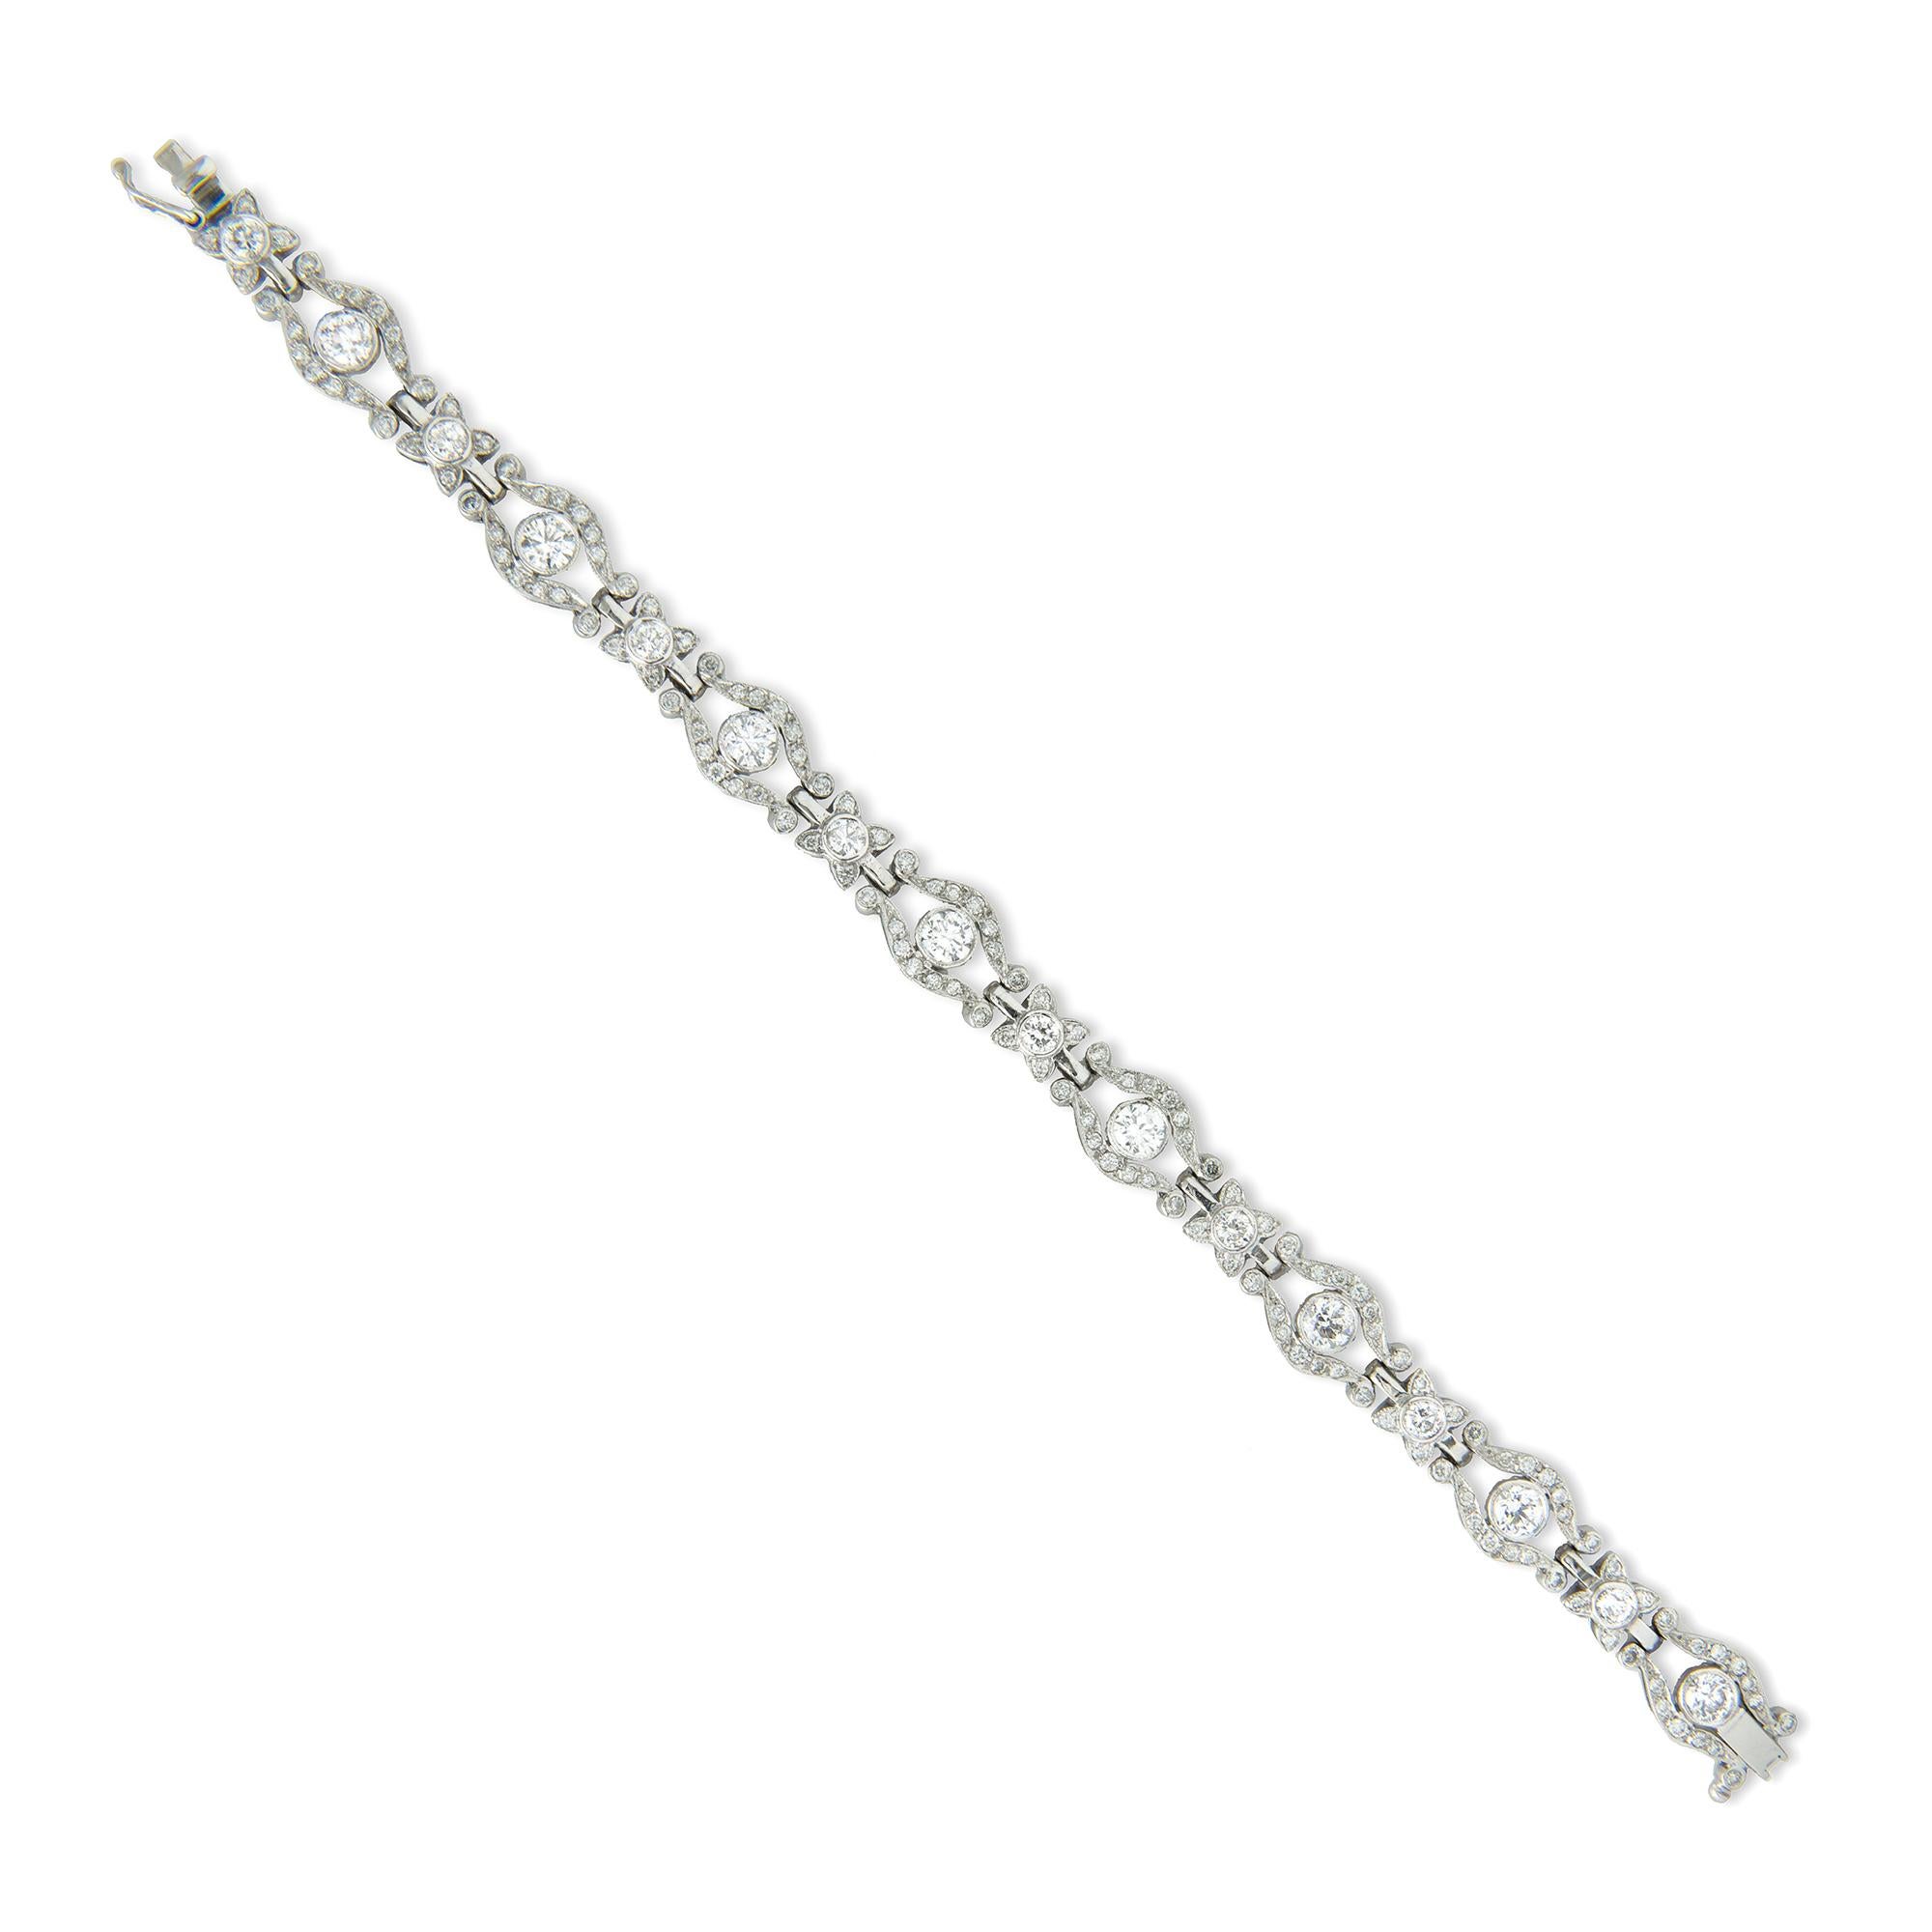 A diamond-set bracelet, the eight scroll design diamond-set openwork links, each with a round brilliant-cut diamond set to the centre, connected by eight smaller diamond-set cluster links, all diamonds weighing approximately 7.7cts all mounted in